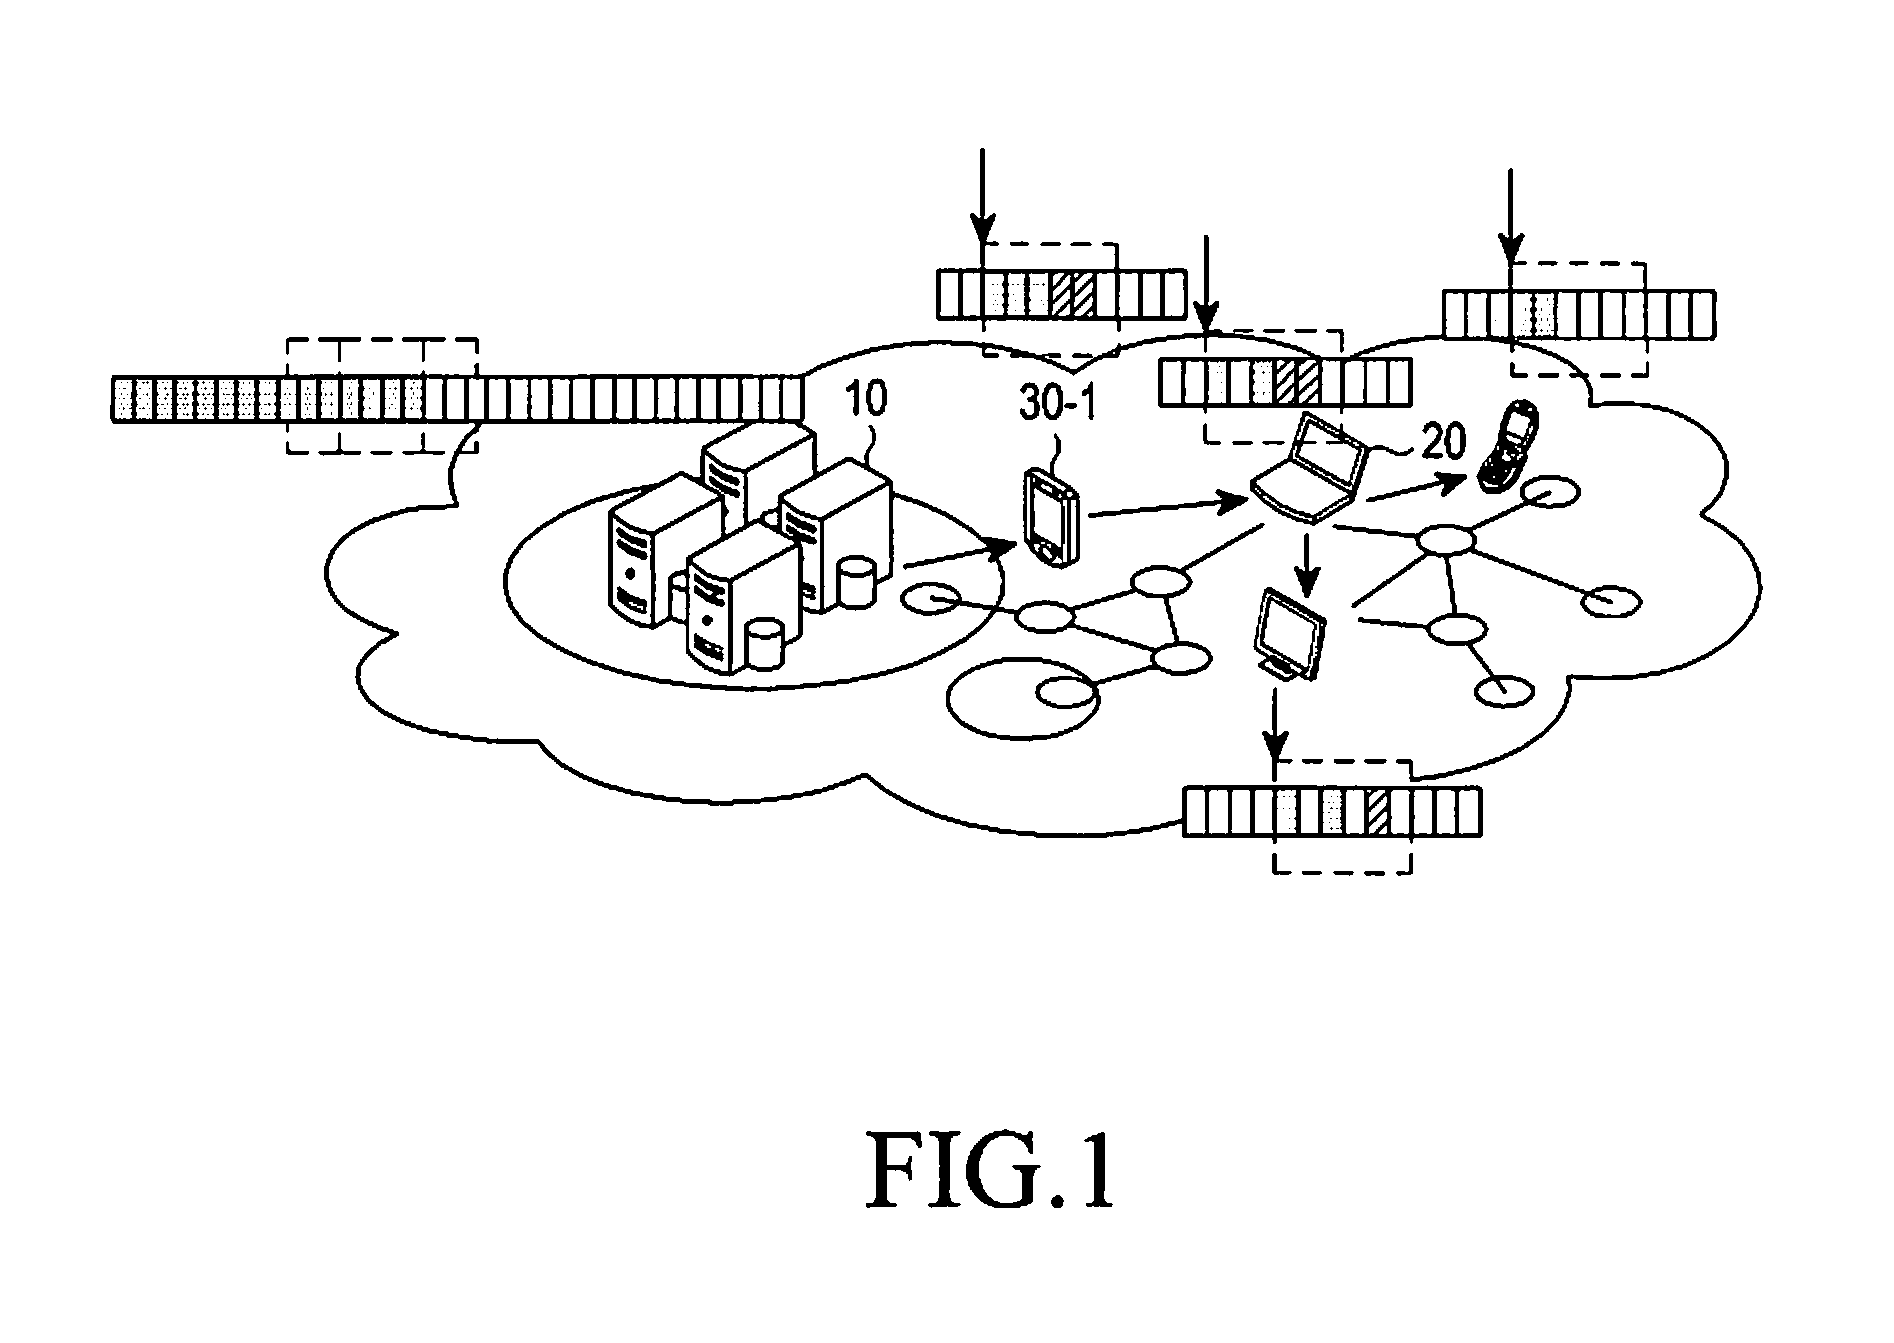 Apparatus and method for providing streaming service in a data communication network